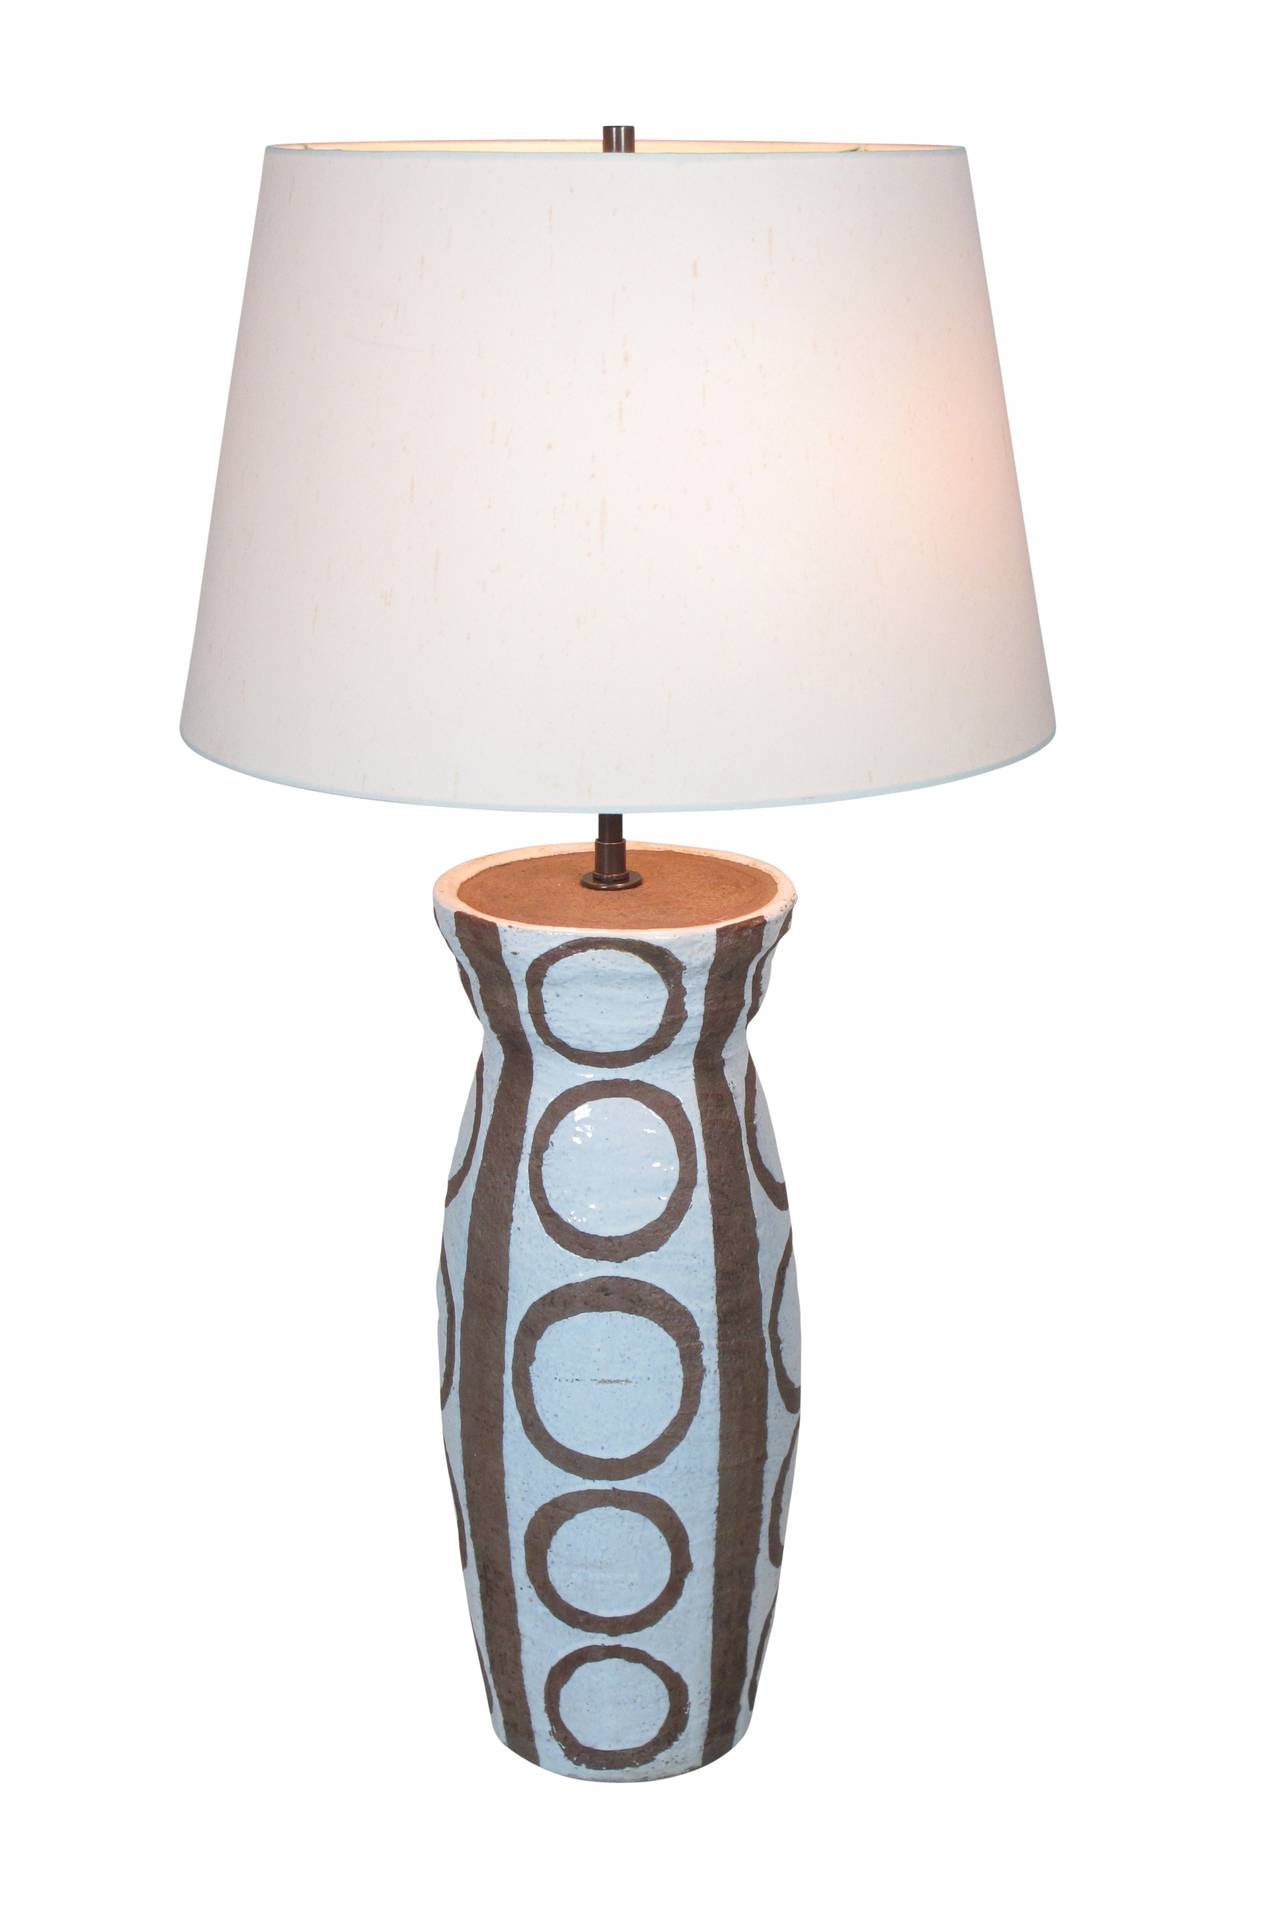 Tall Primitive Patterned Italian Ceramic Table Lamp by Zaccagnini In Excellent Condition In New York, NY